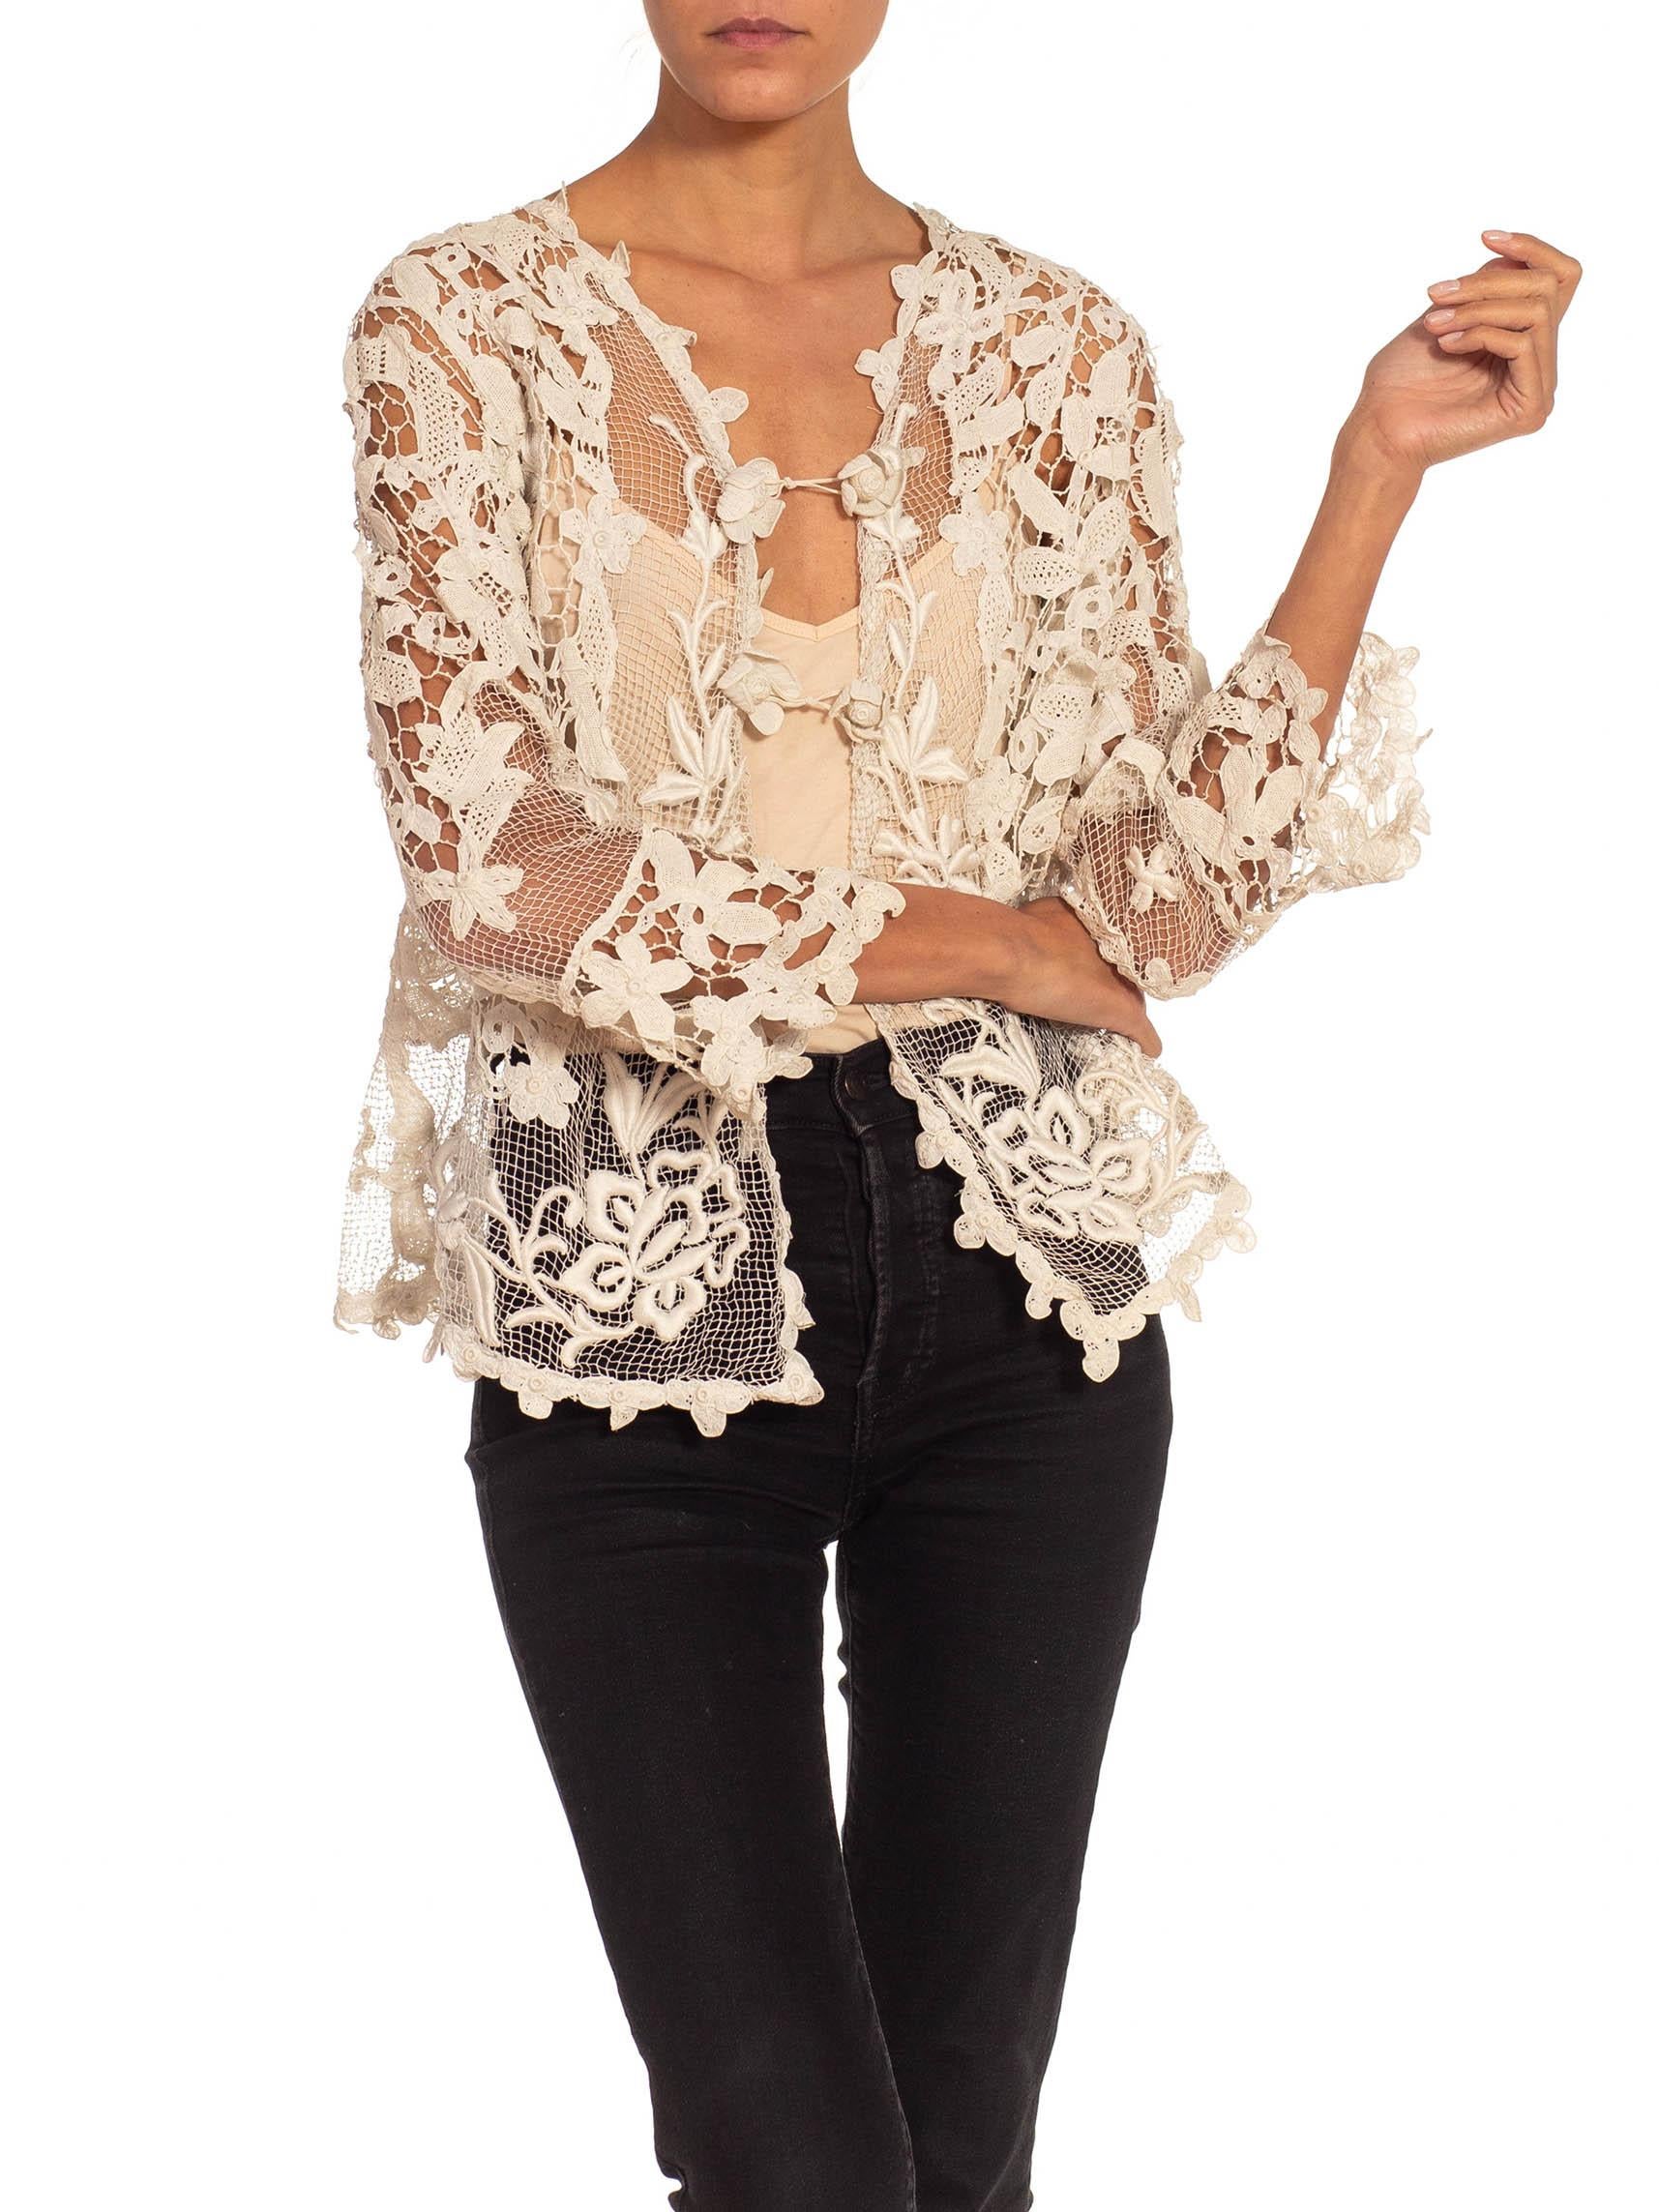 Victorian Off White Needle Lace Long Sleeve Jacket With Flower Hooks For Sale 5